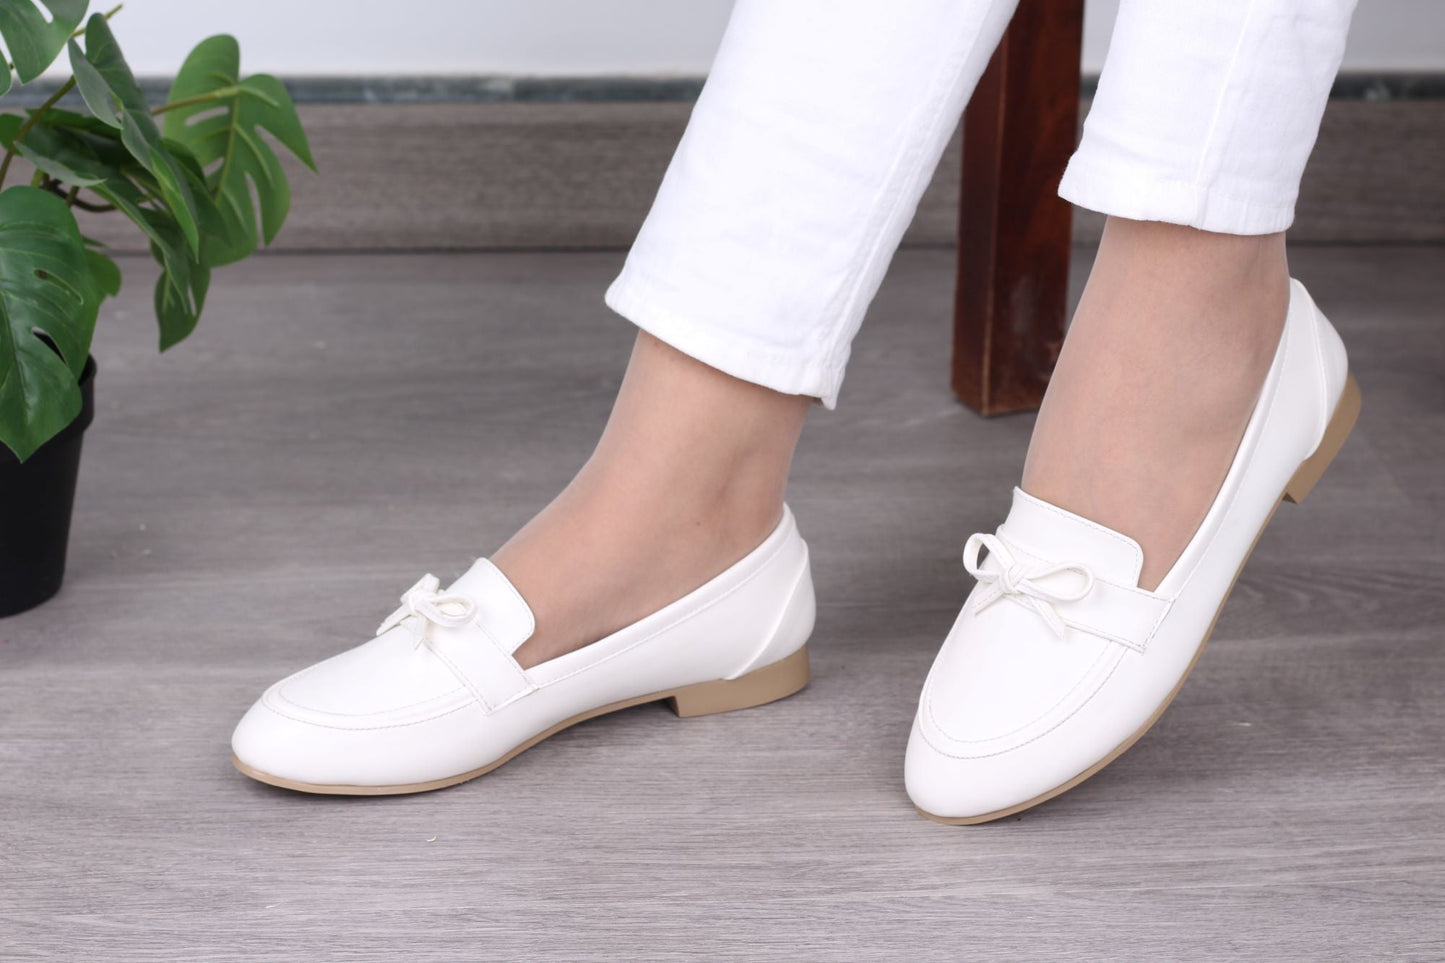 Comfortable and soft white loafer women's shoes, excellent material